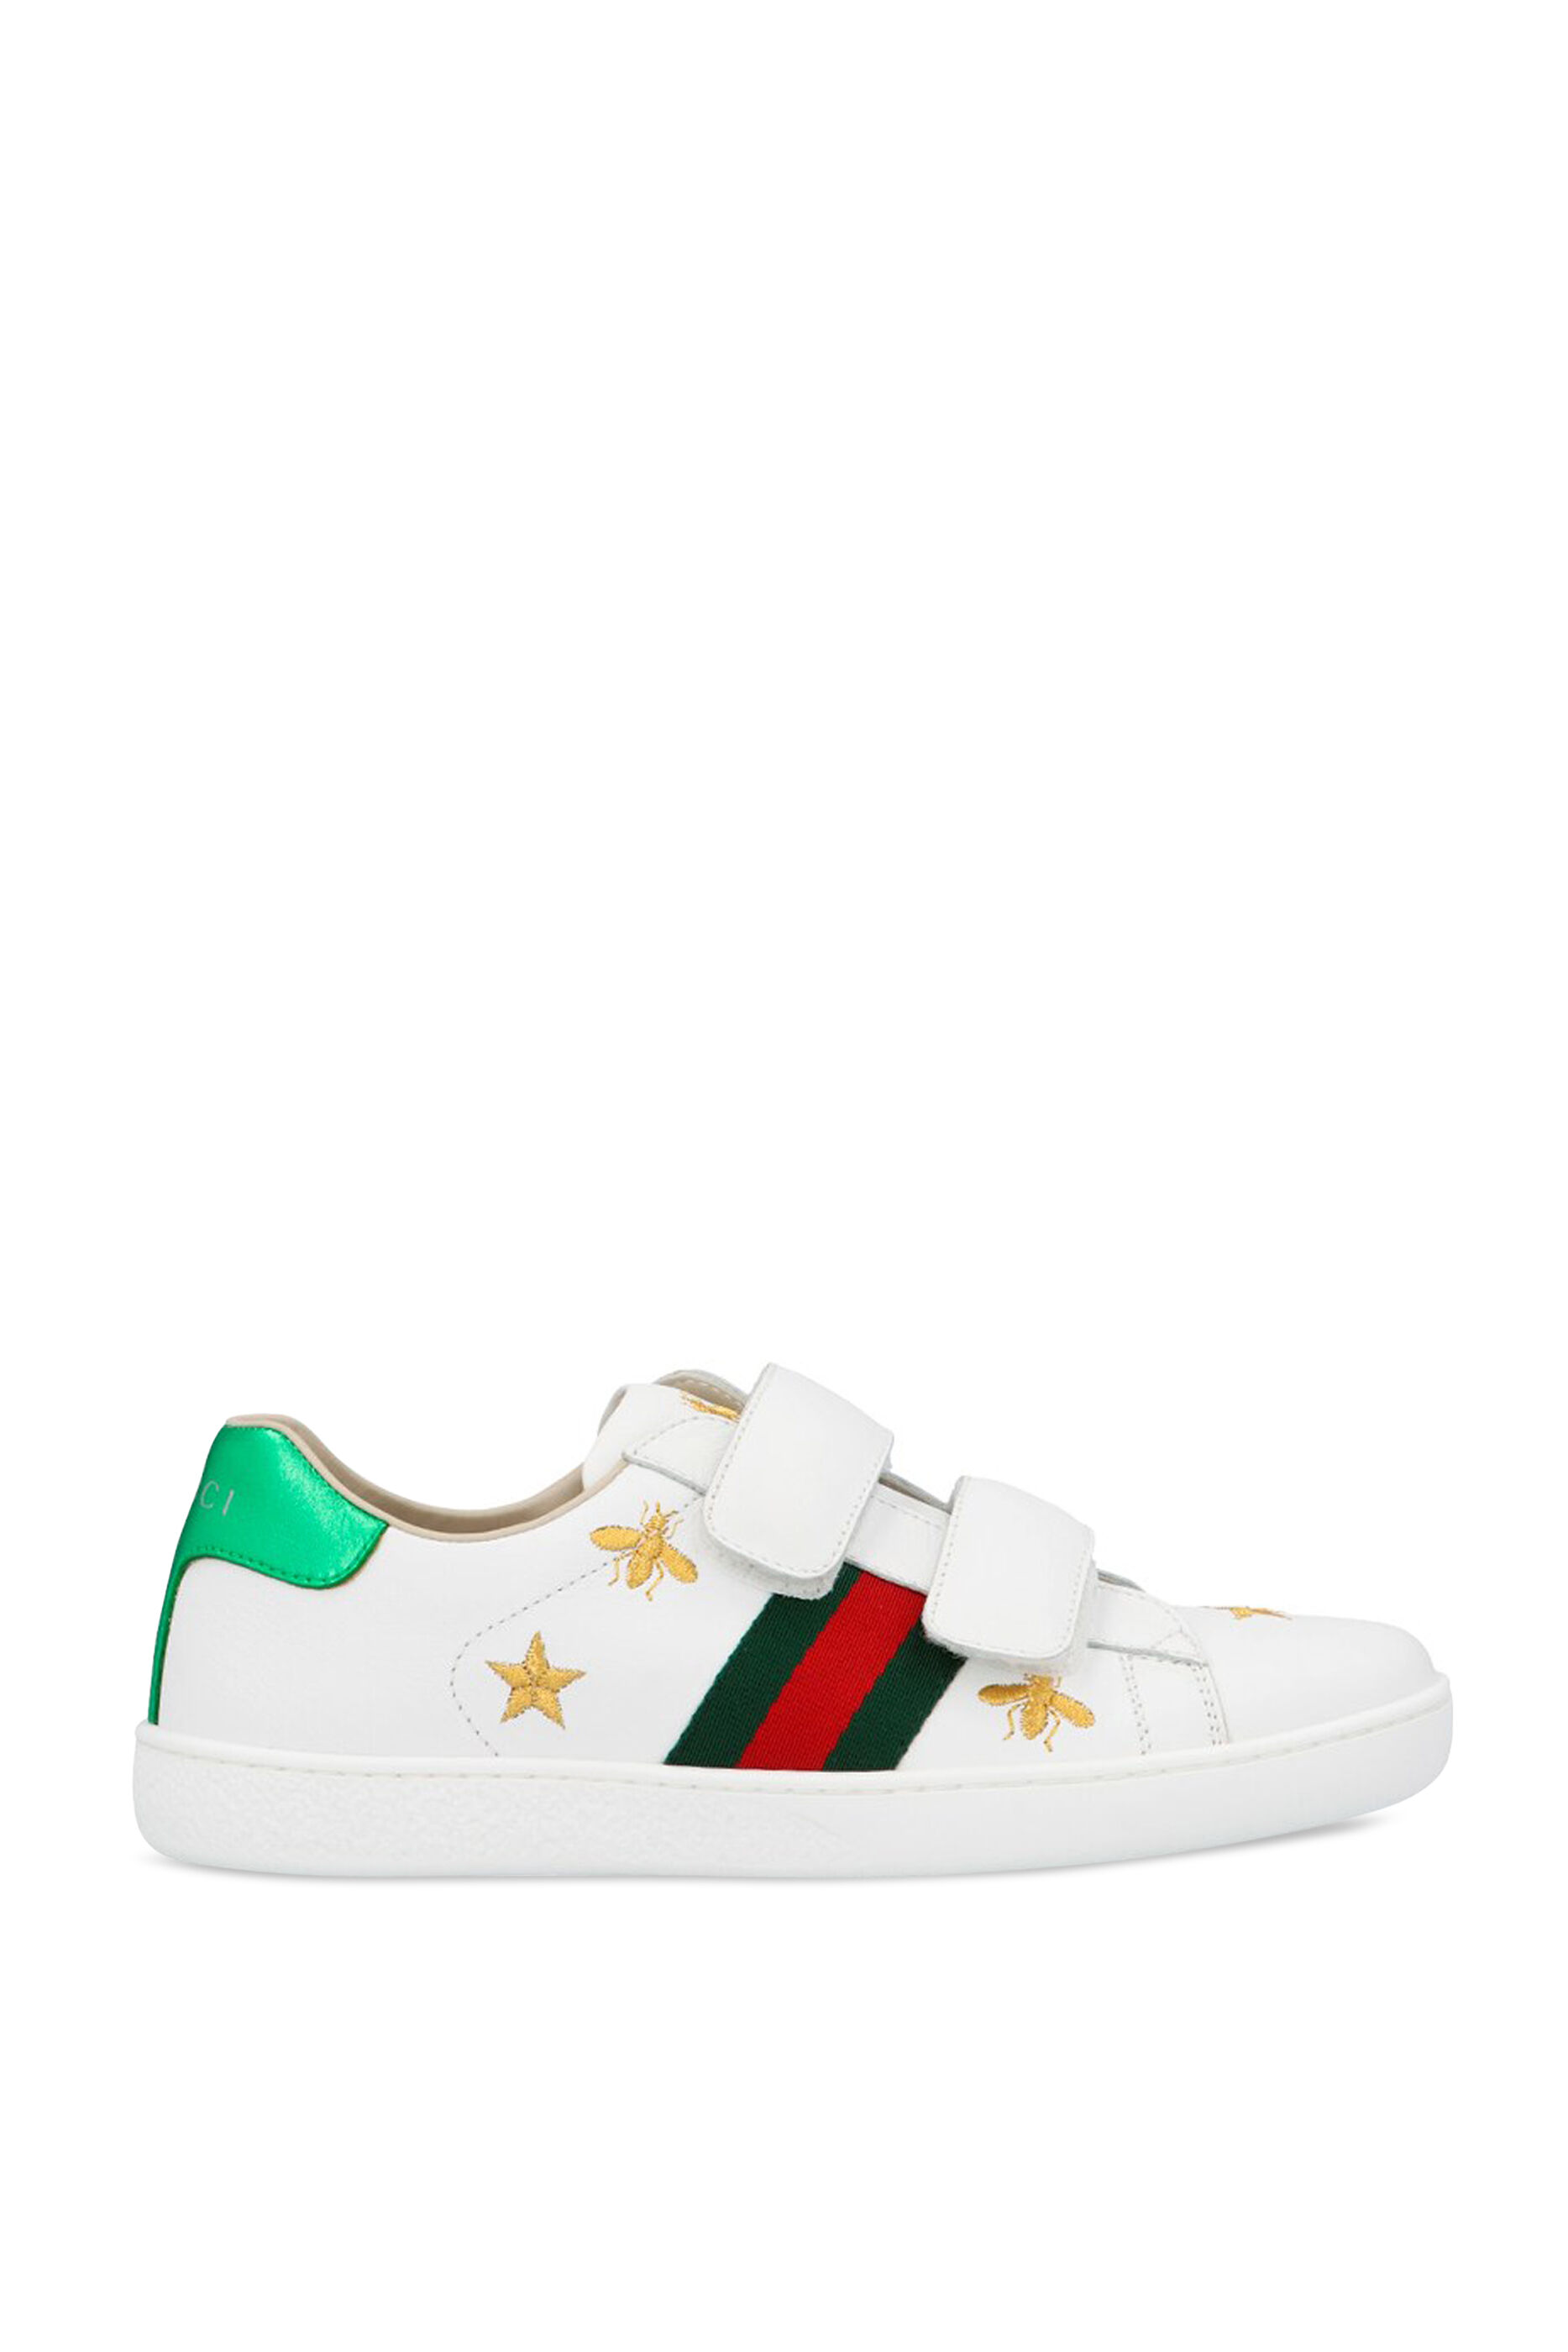 gucci bees and stars sneakers